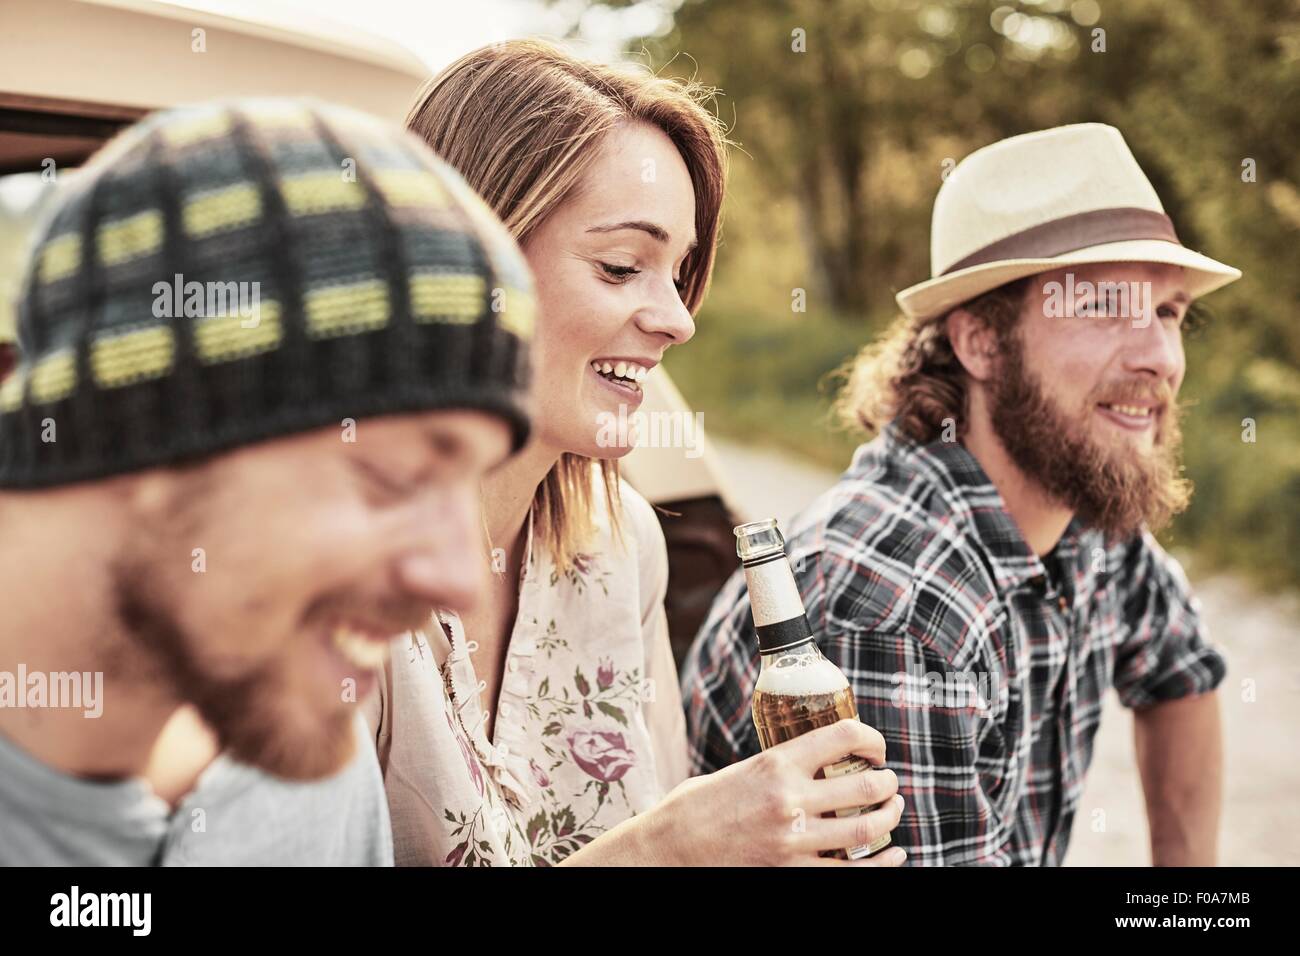 Three people holding bottled beer smiling Stock Photo